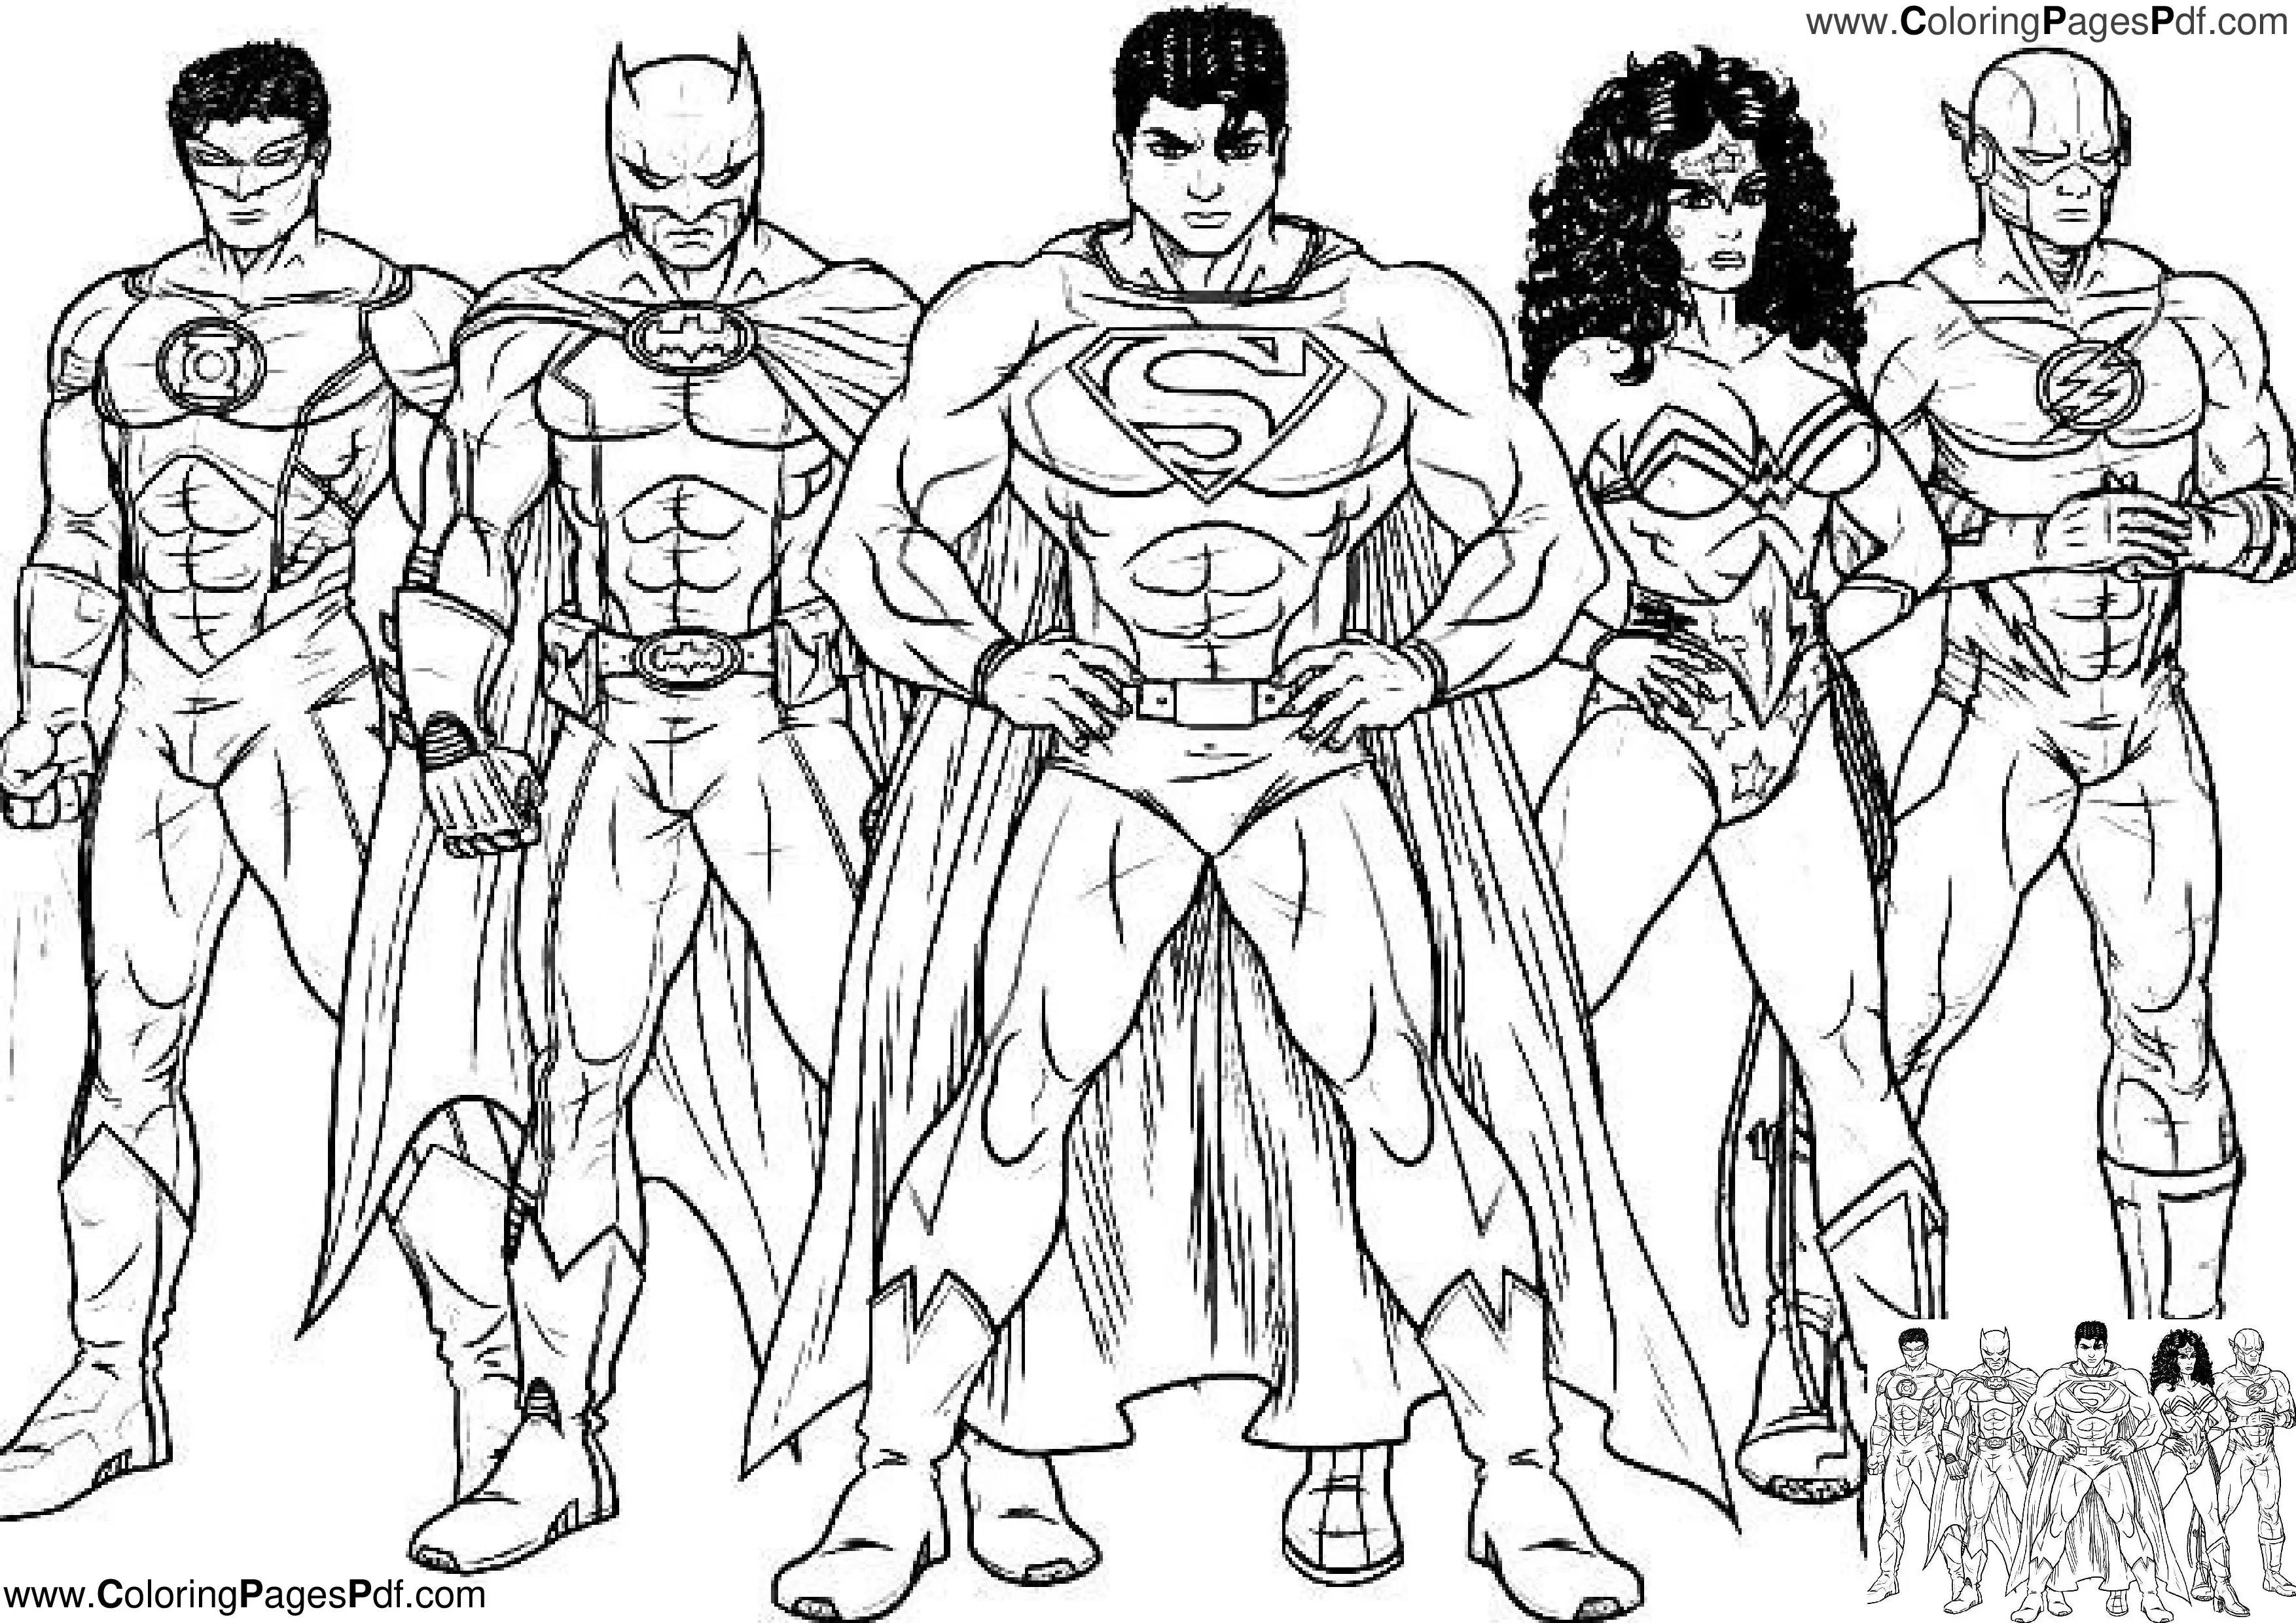 Printable superman coloring pages pdf